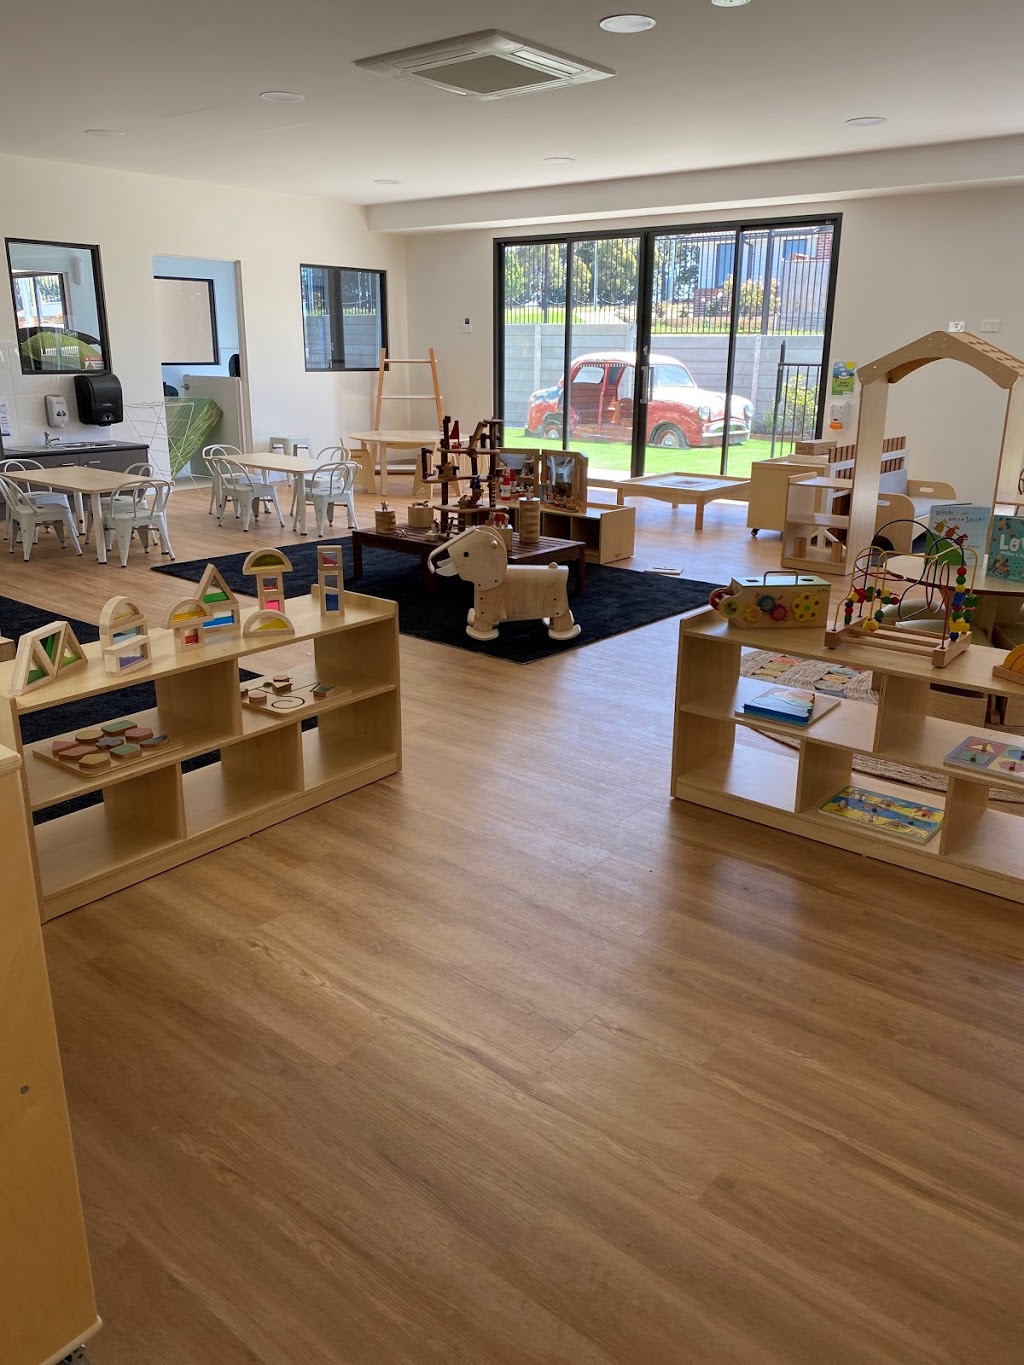 Aspire Childcare Clyde North |  | 1S Cornhill Rd, Clyde North VIC 3978, Australia | 1800978429 OR +61 1800 978 429